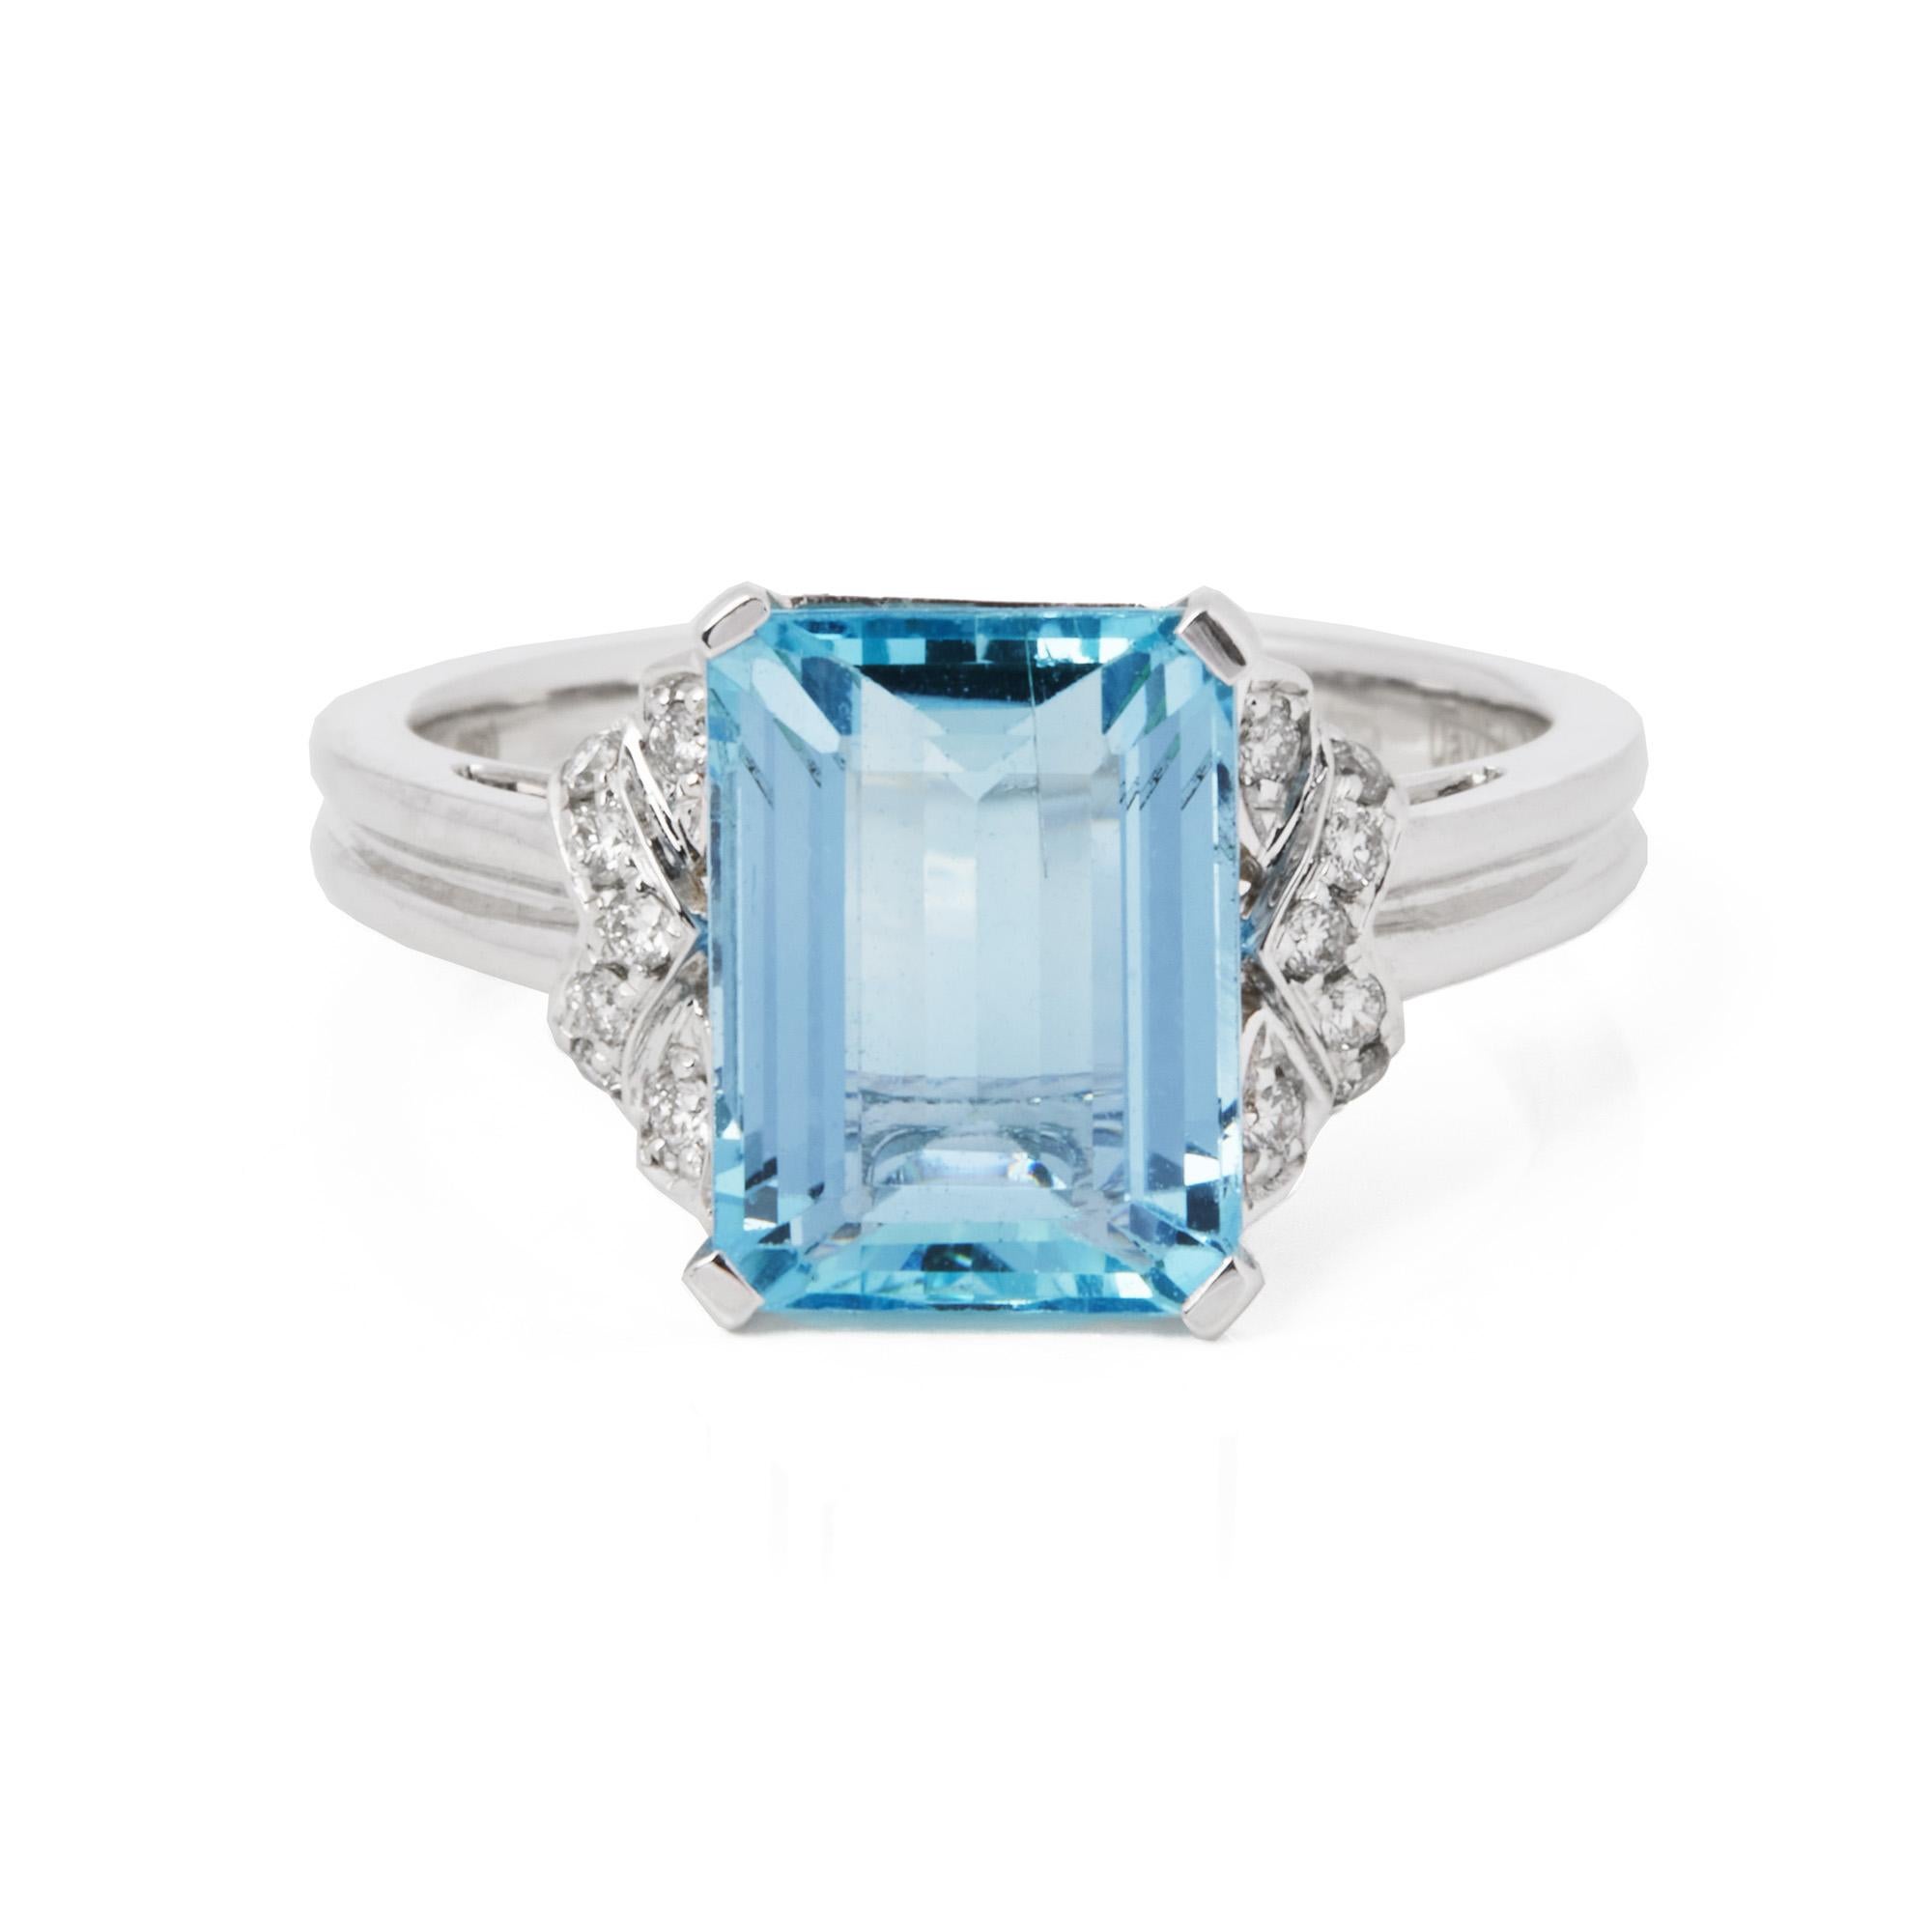 This ring is from the private collection of gemstone jewellery individually designed by David Jerome. It features an emerald cut aquamarine set with diamonds. Accompanied by a IGL gem certificate. UK ring size N. EU ring size 54. US ring size 7. 